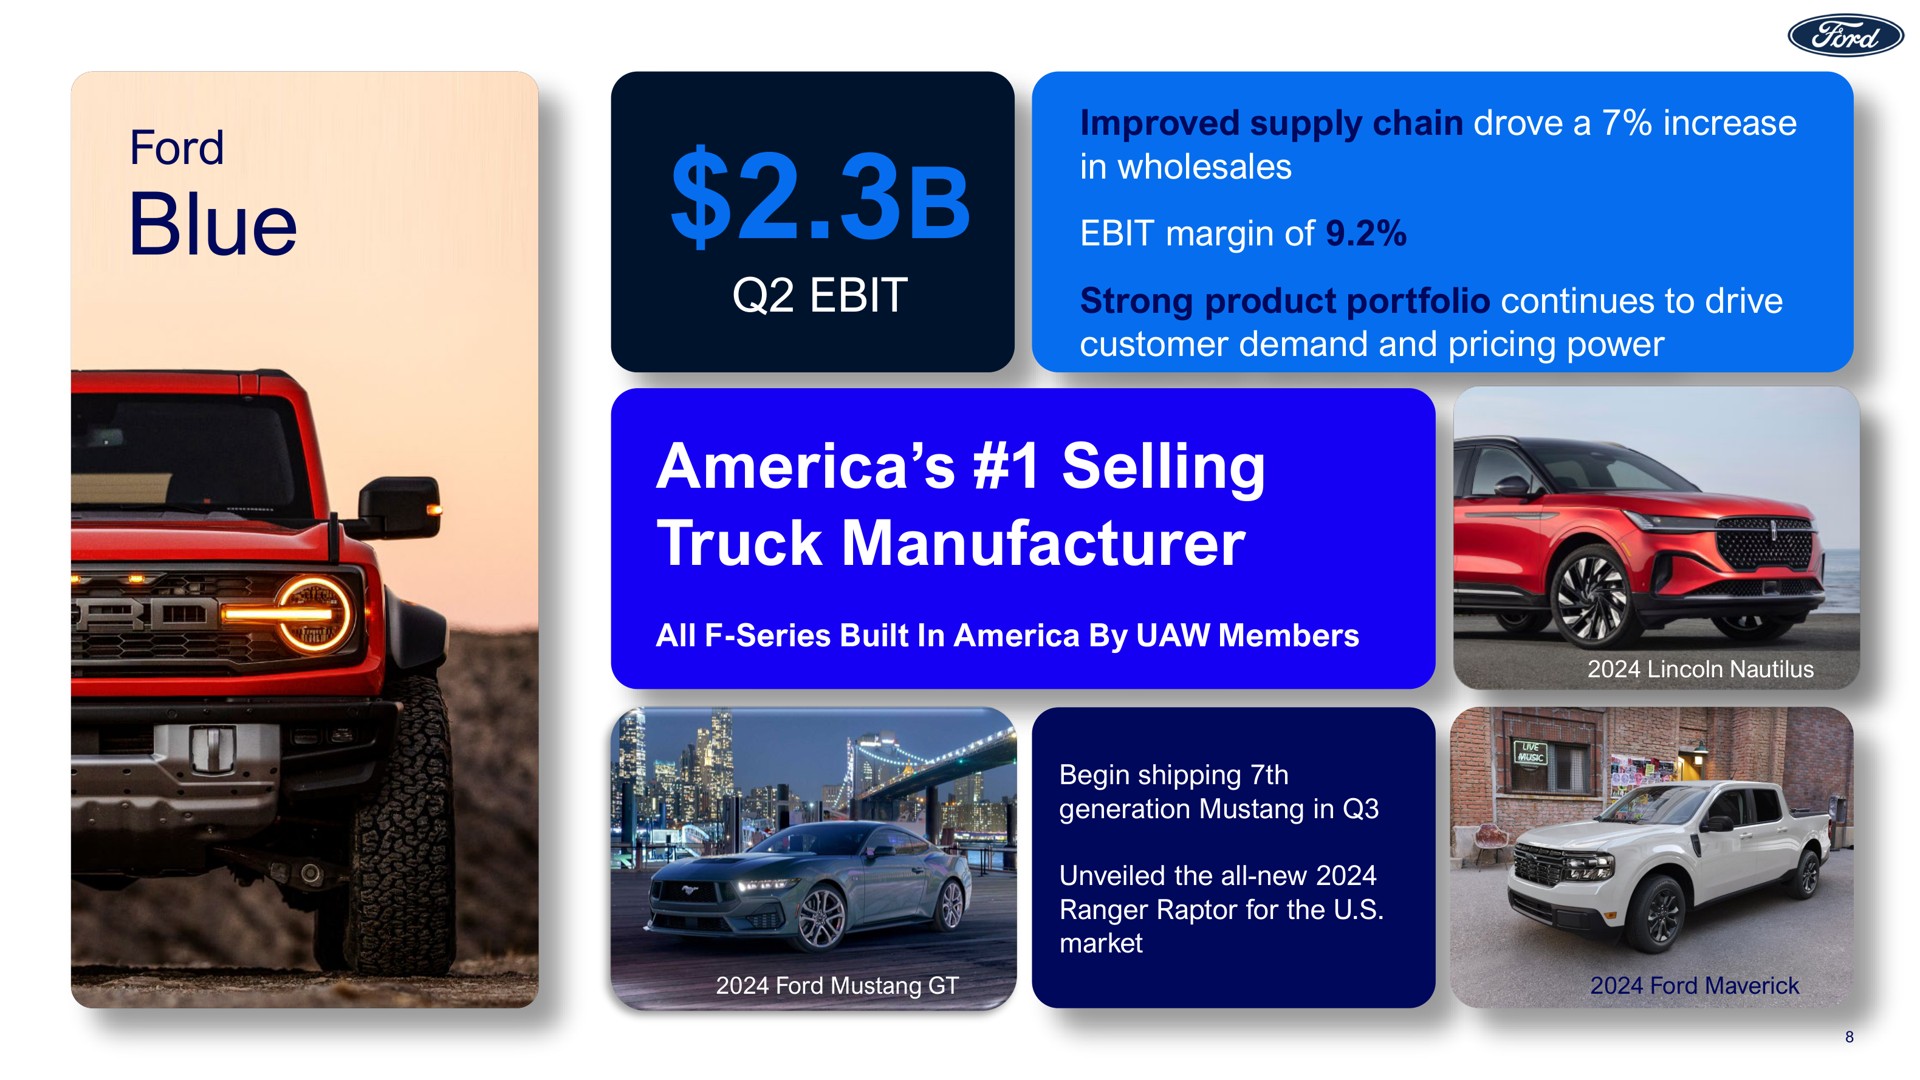 ford blue improved supply chain drove a increase in wholesales margin of strong product portfolio continues to drive customer demand and pricing power selling truck manufacturer | Ford